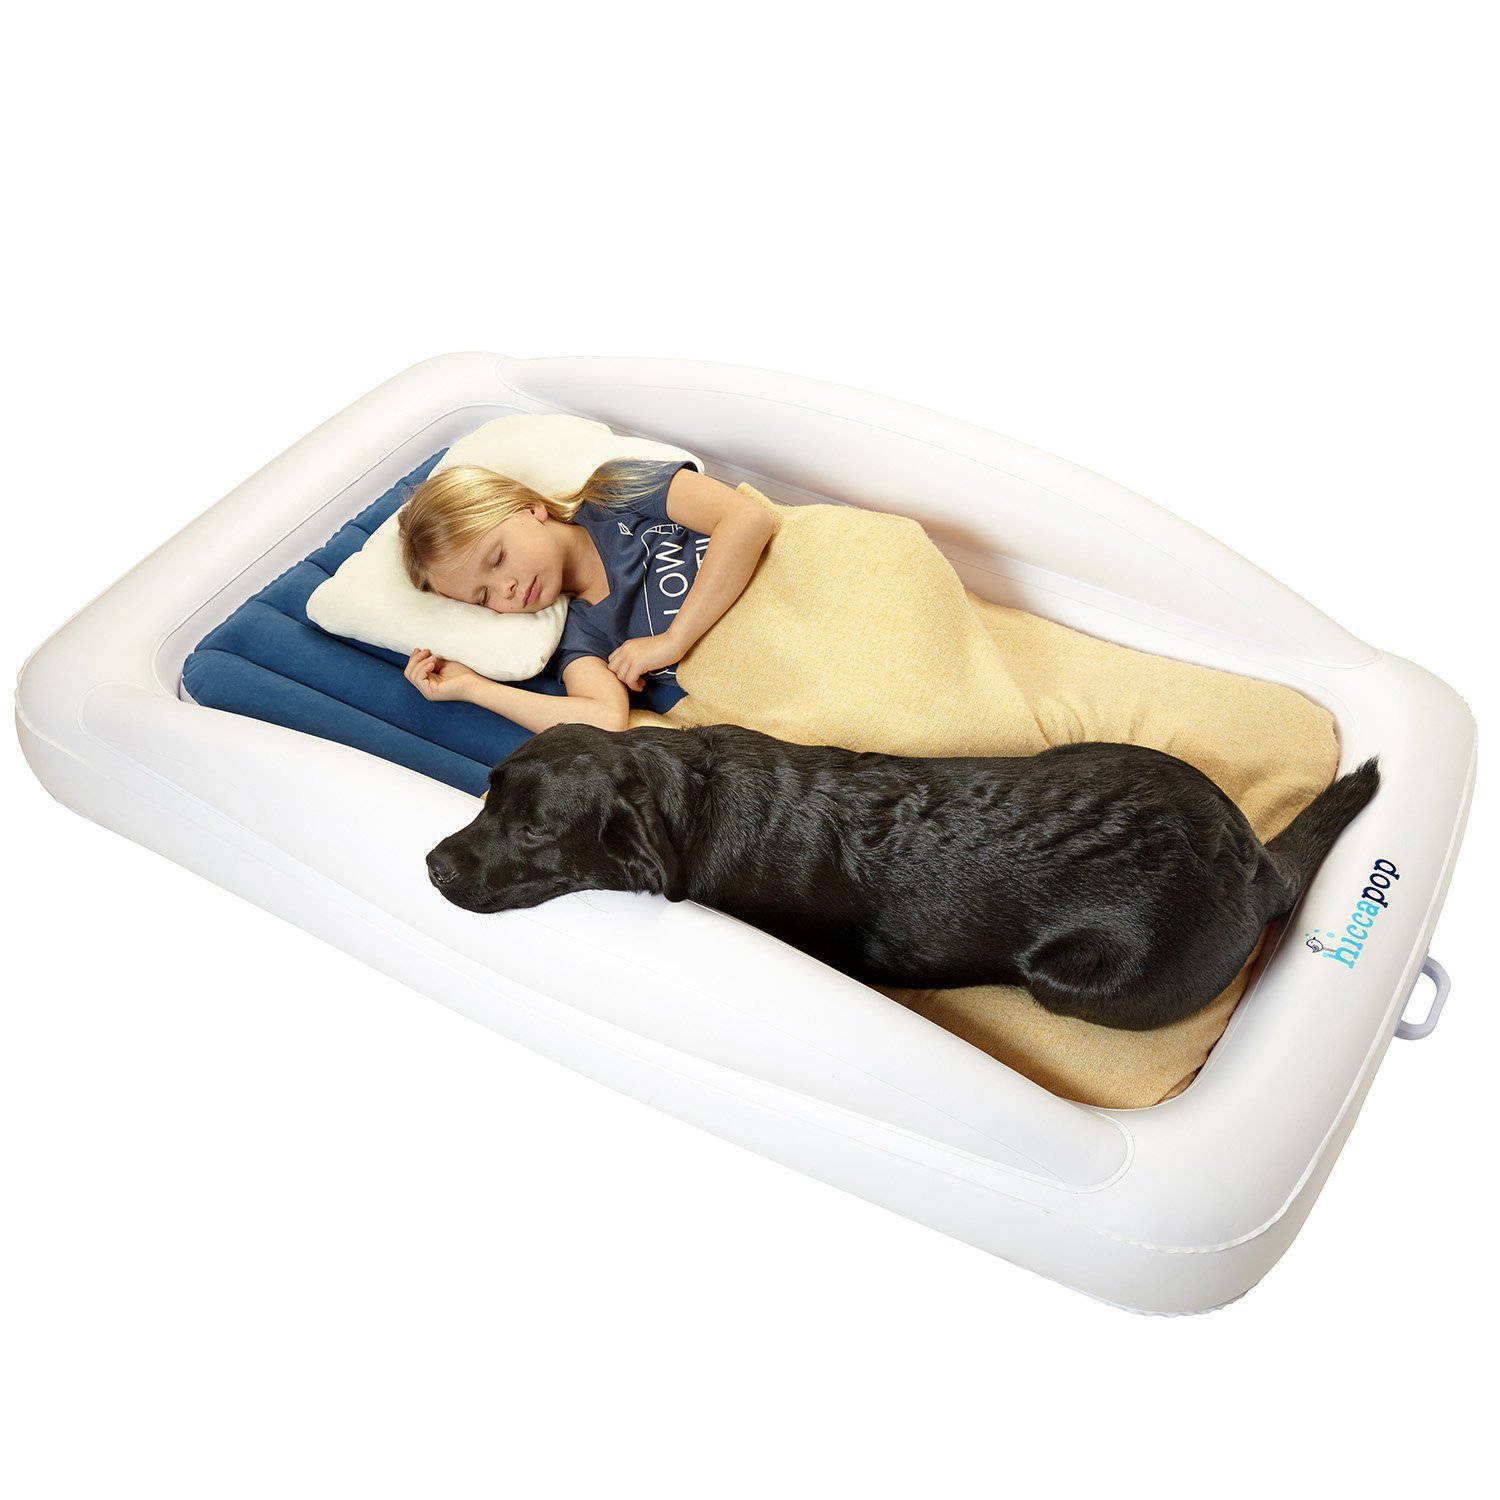 hiccapop Inflatable Toddler Travel Bed